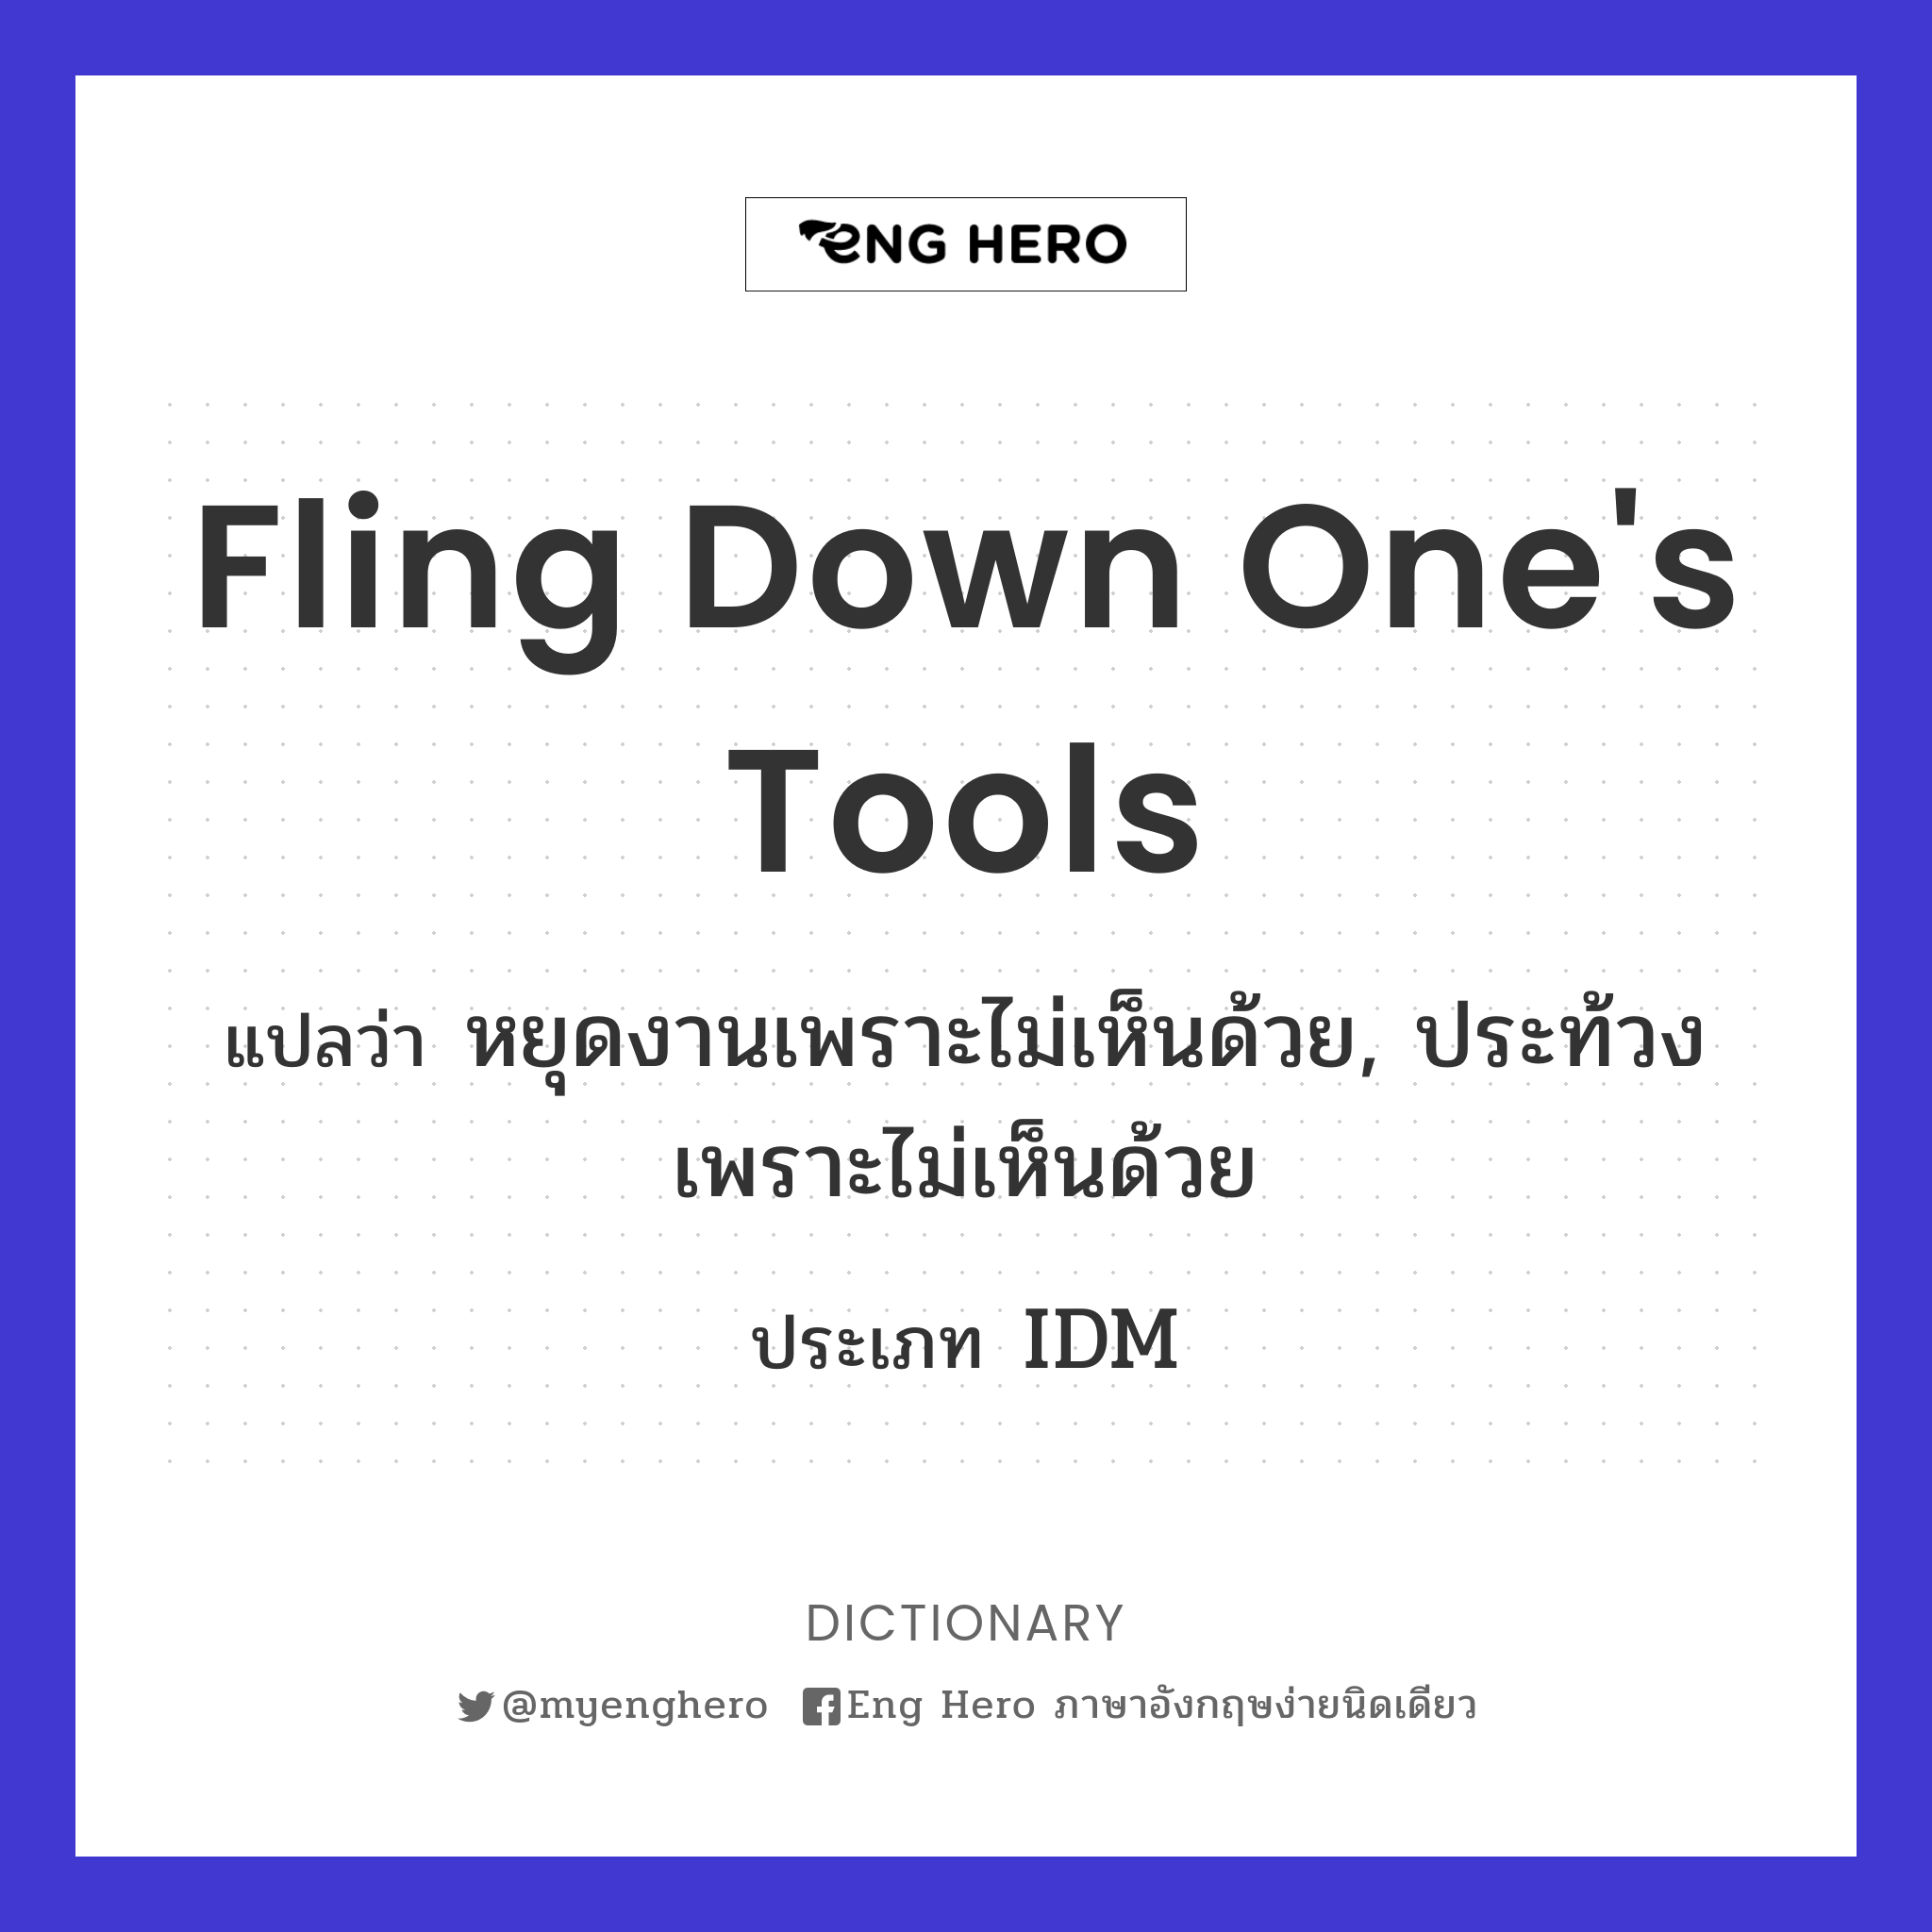 fling down one's tools